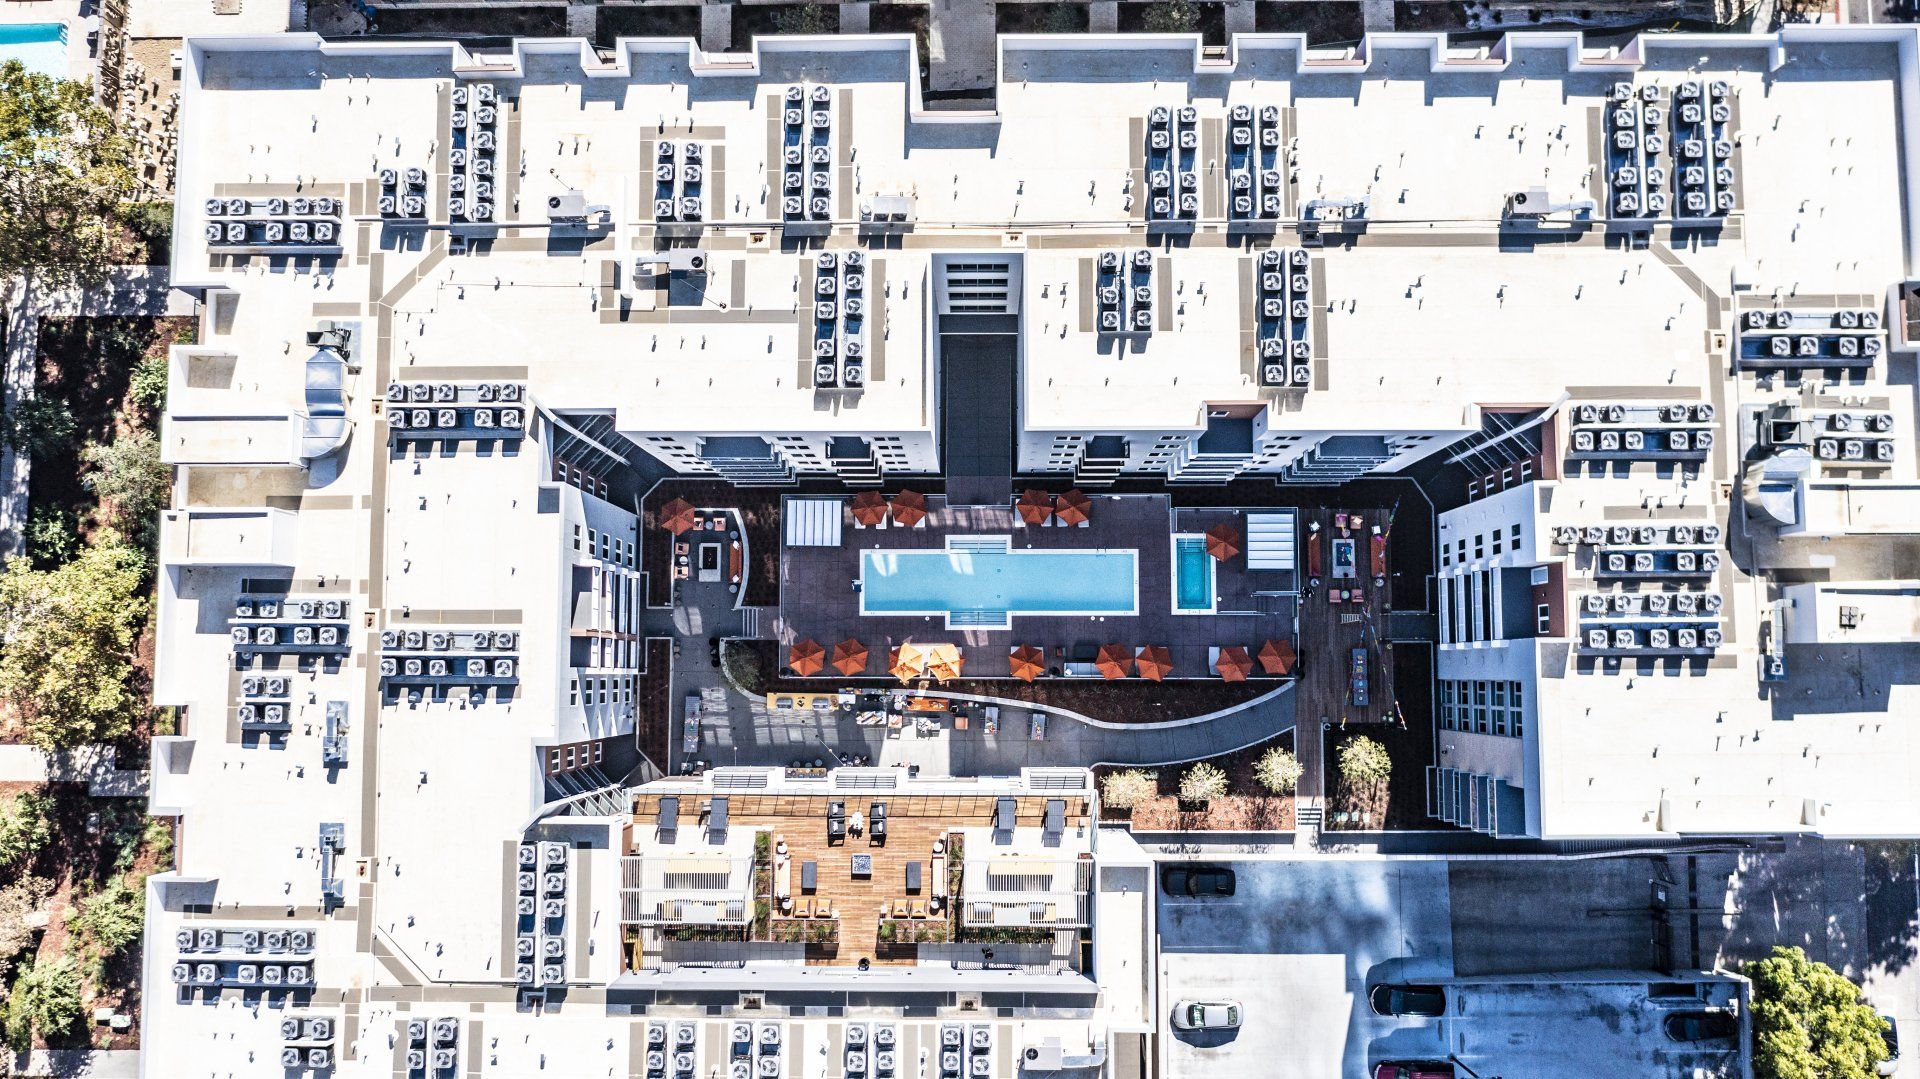 An aerial view of a building with a pool in the middle at Capitol Towers.